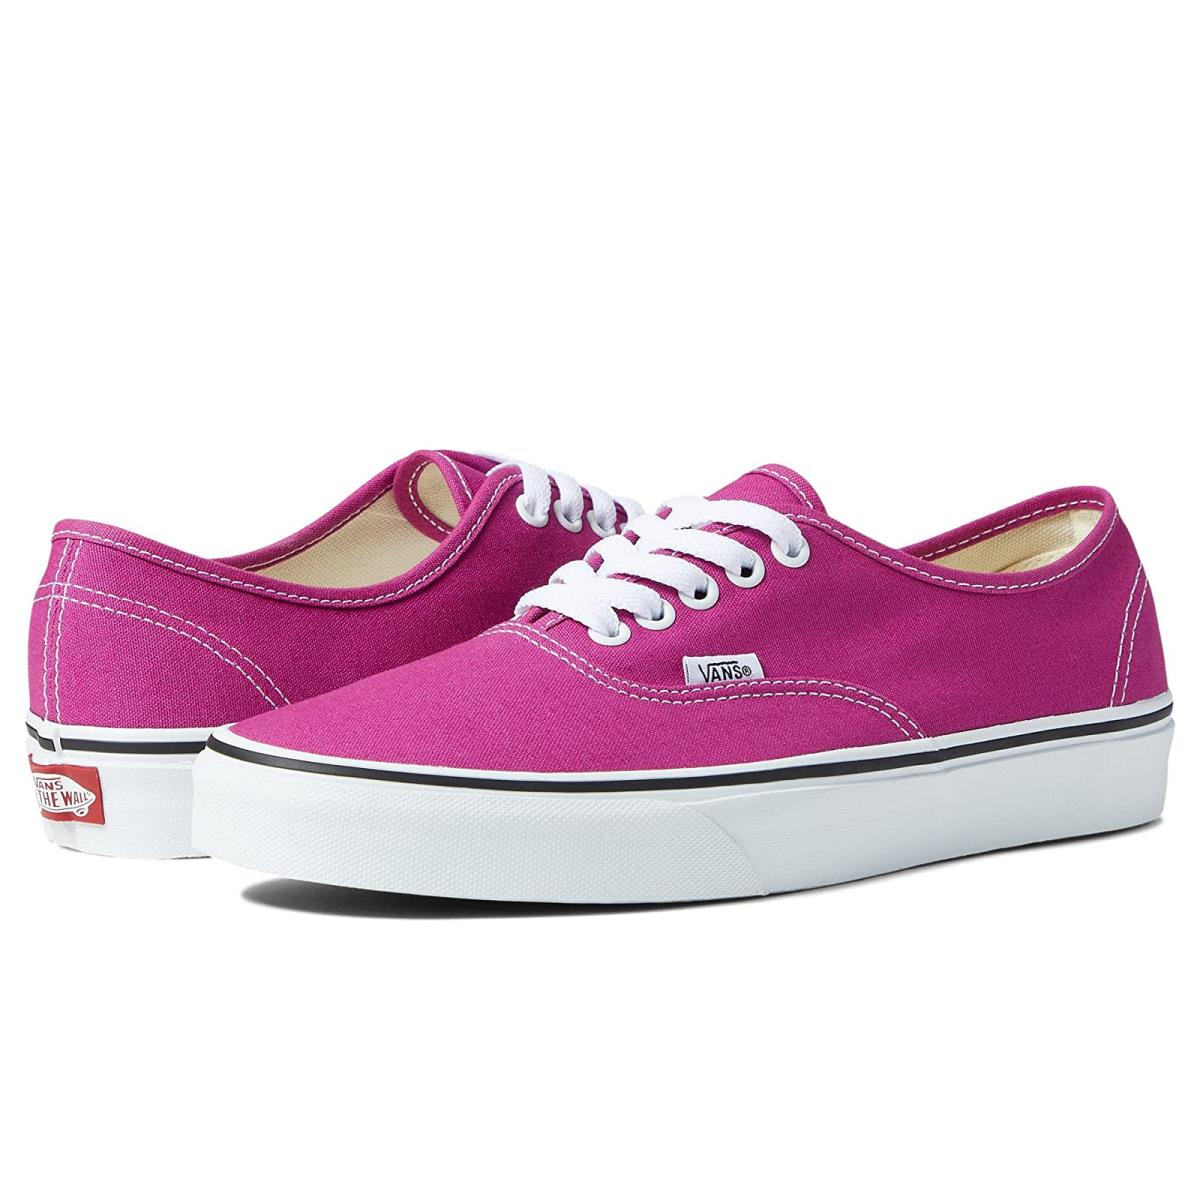 Unisex Sneakers Athletic Shoes Vans Fuchsia Red/True White